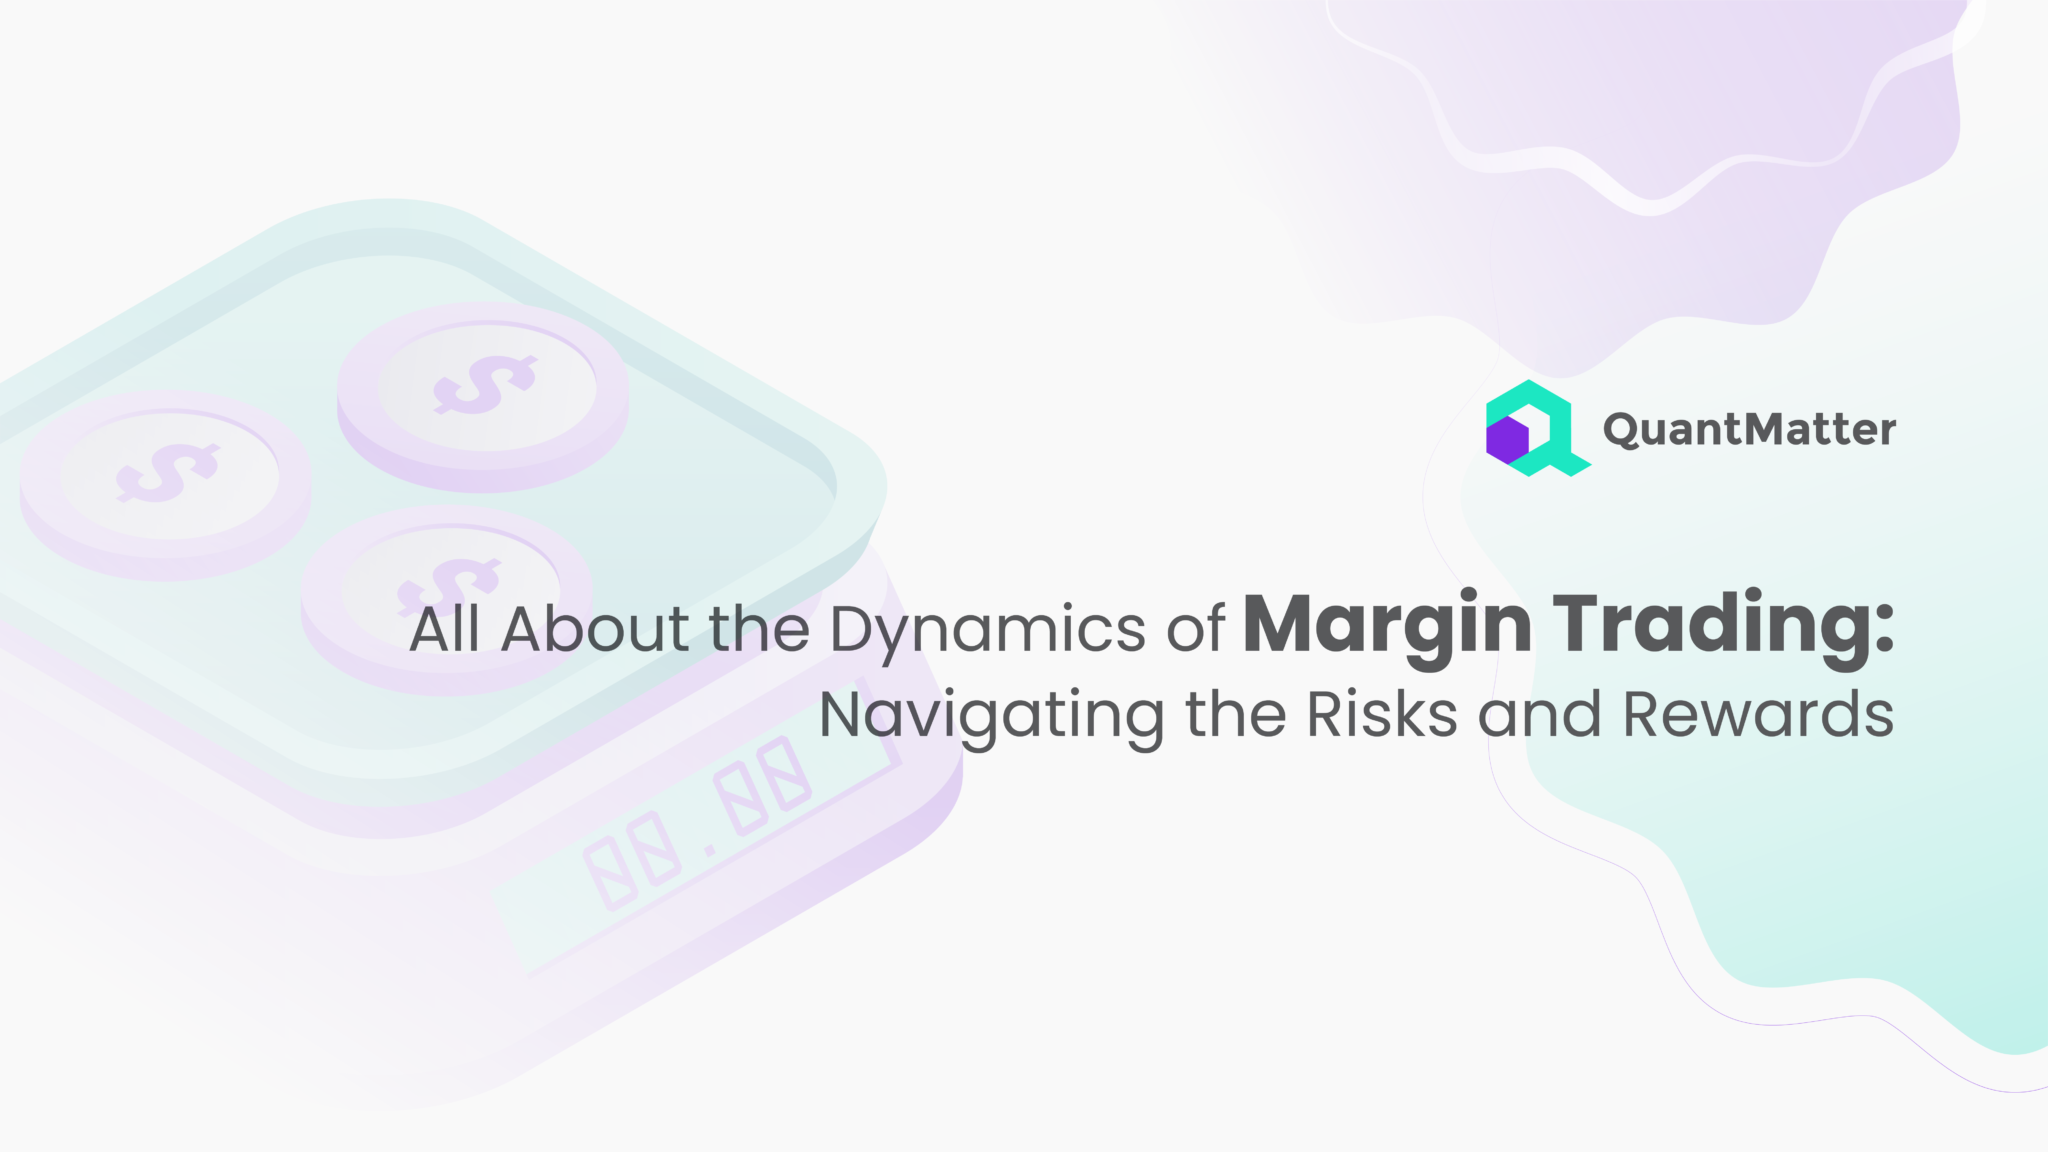 All About the Dynamics of Margin Trading Navigating the Risks and Rewards